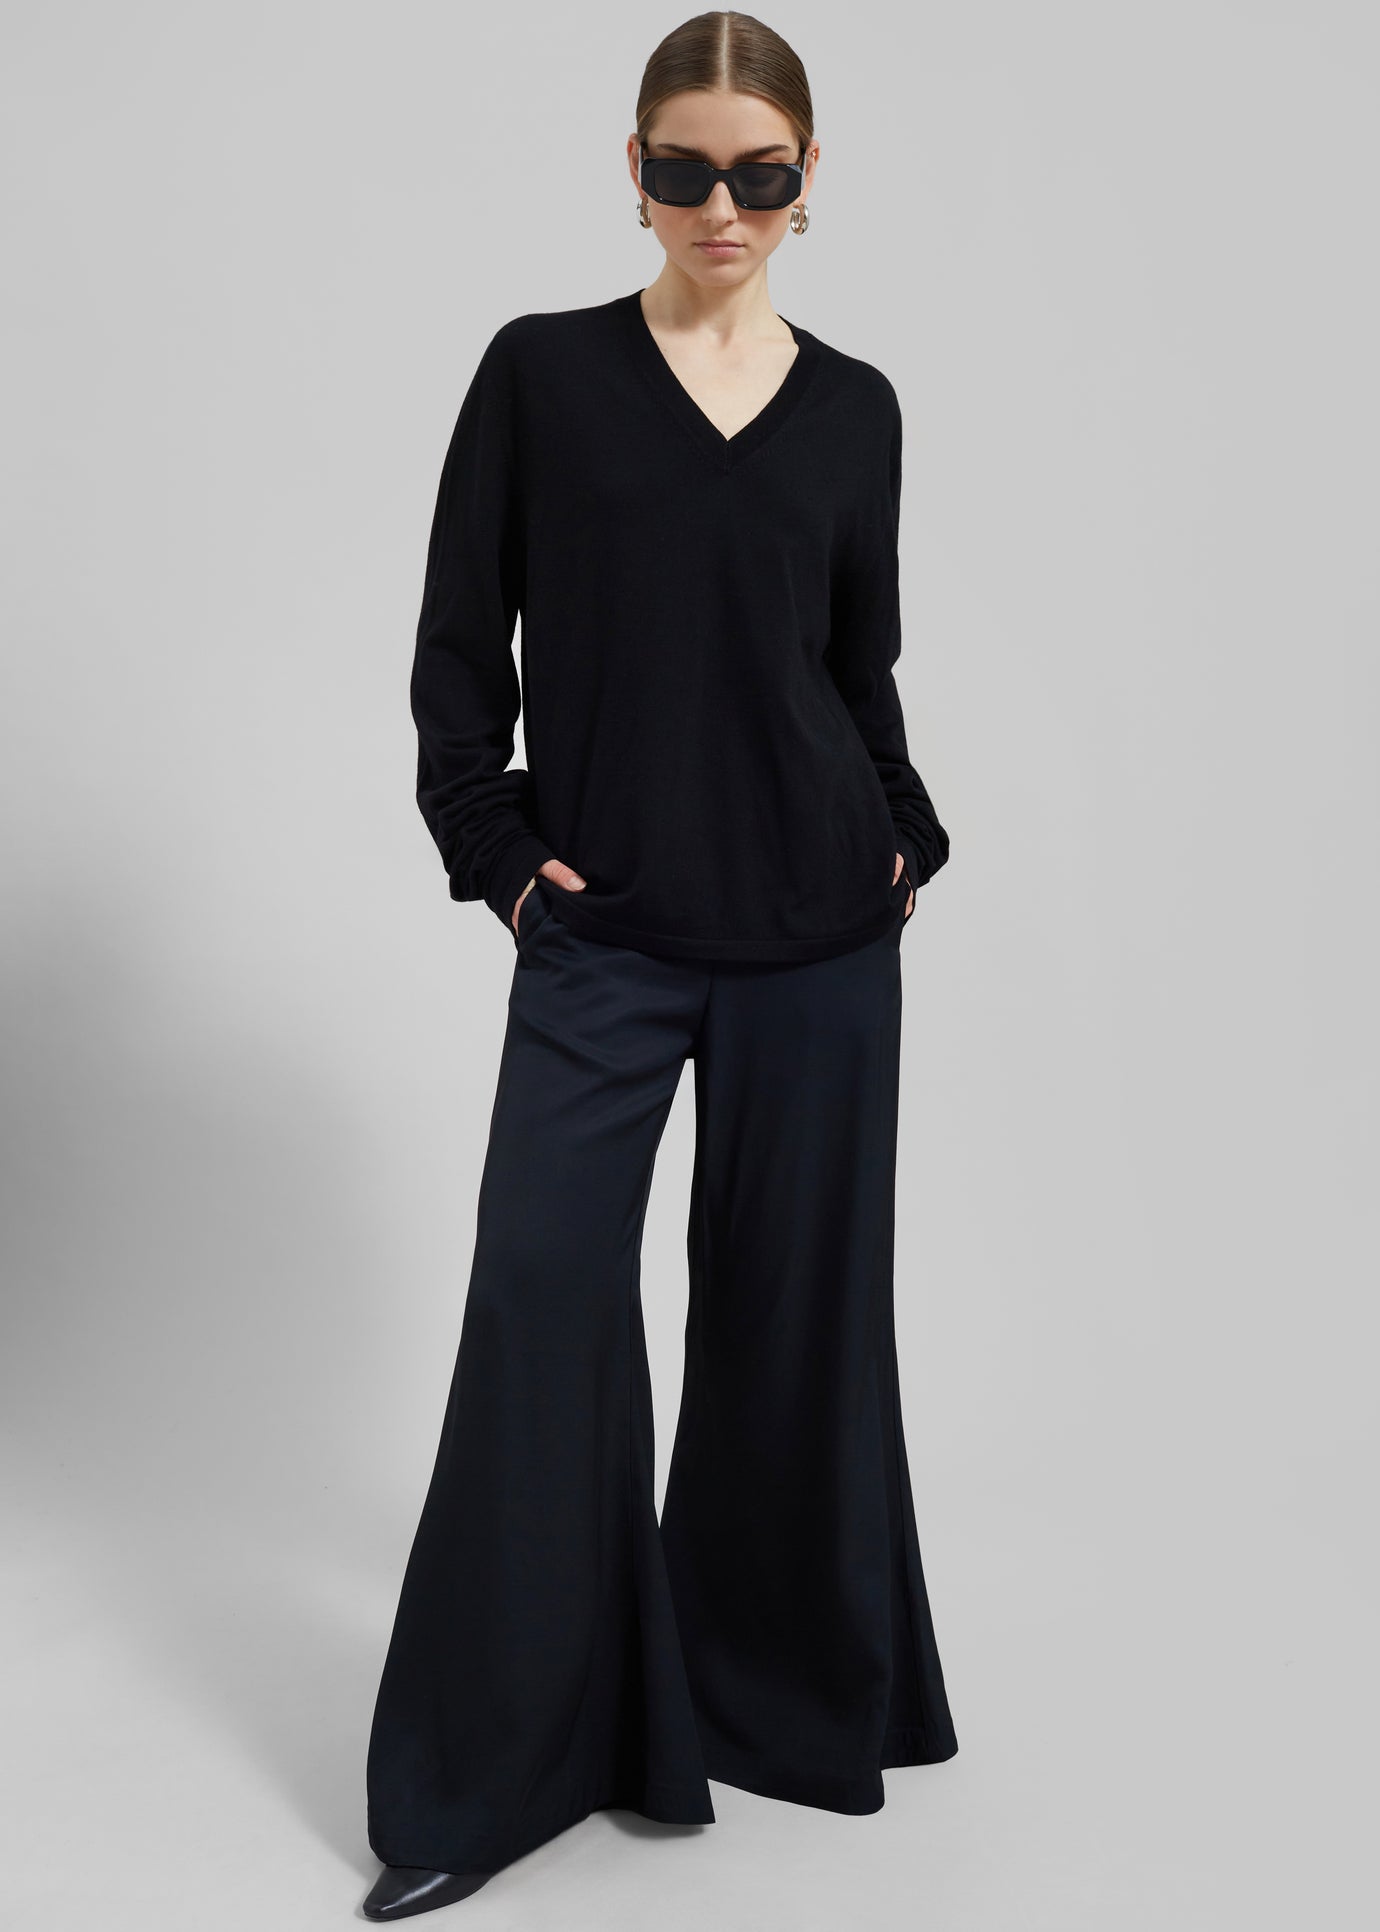 By Malene Birger Lucee Flared Trousers - Black